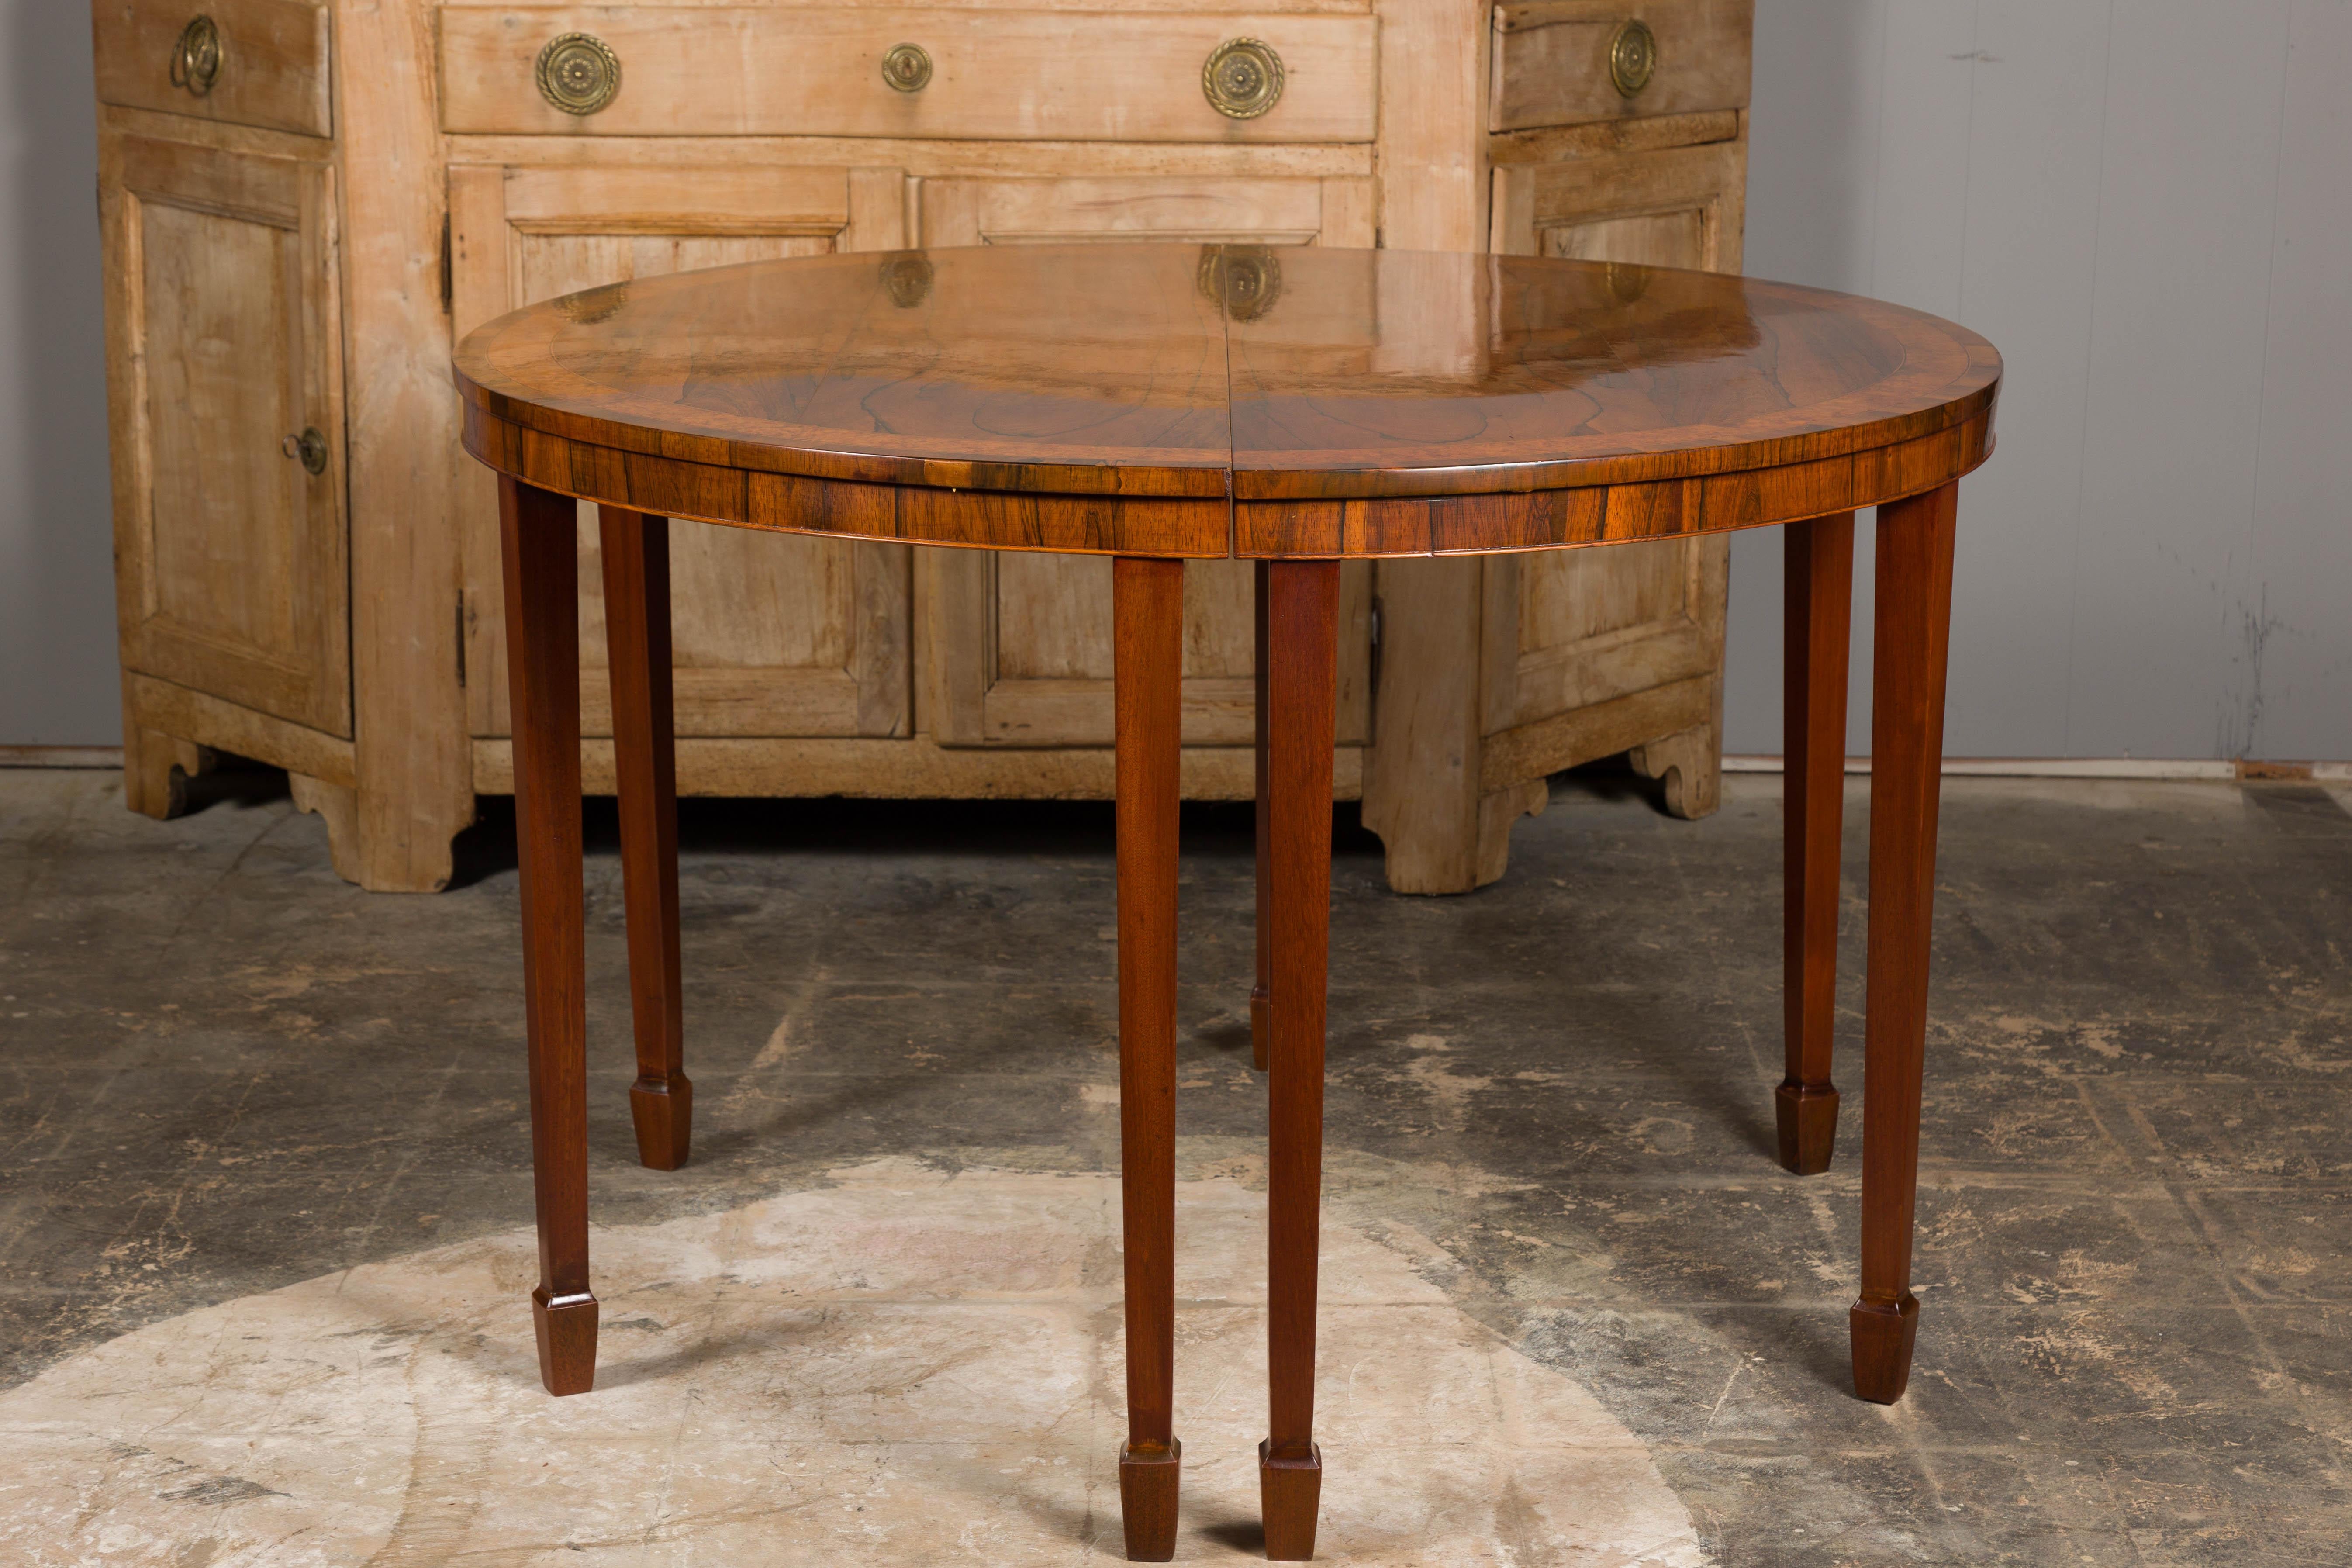 English 19th Century Mahogany Demilune Console Tables with Tapered Legs, a Pair For Sale 10